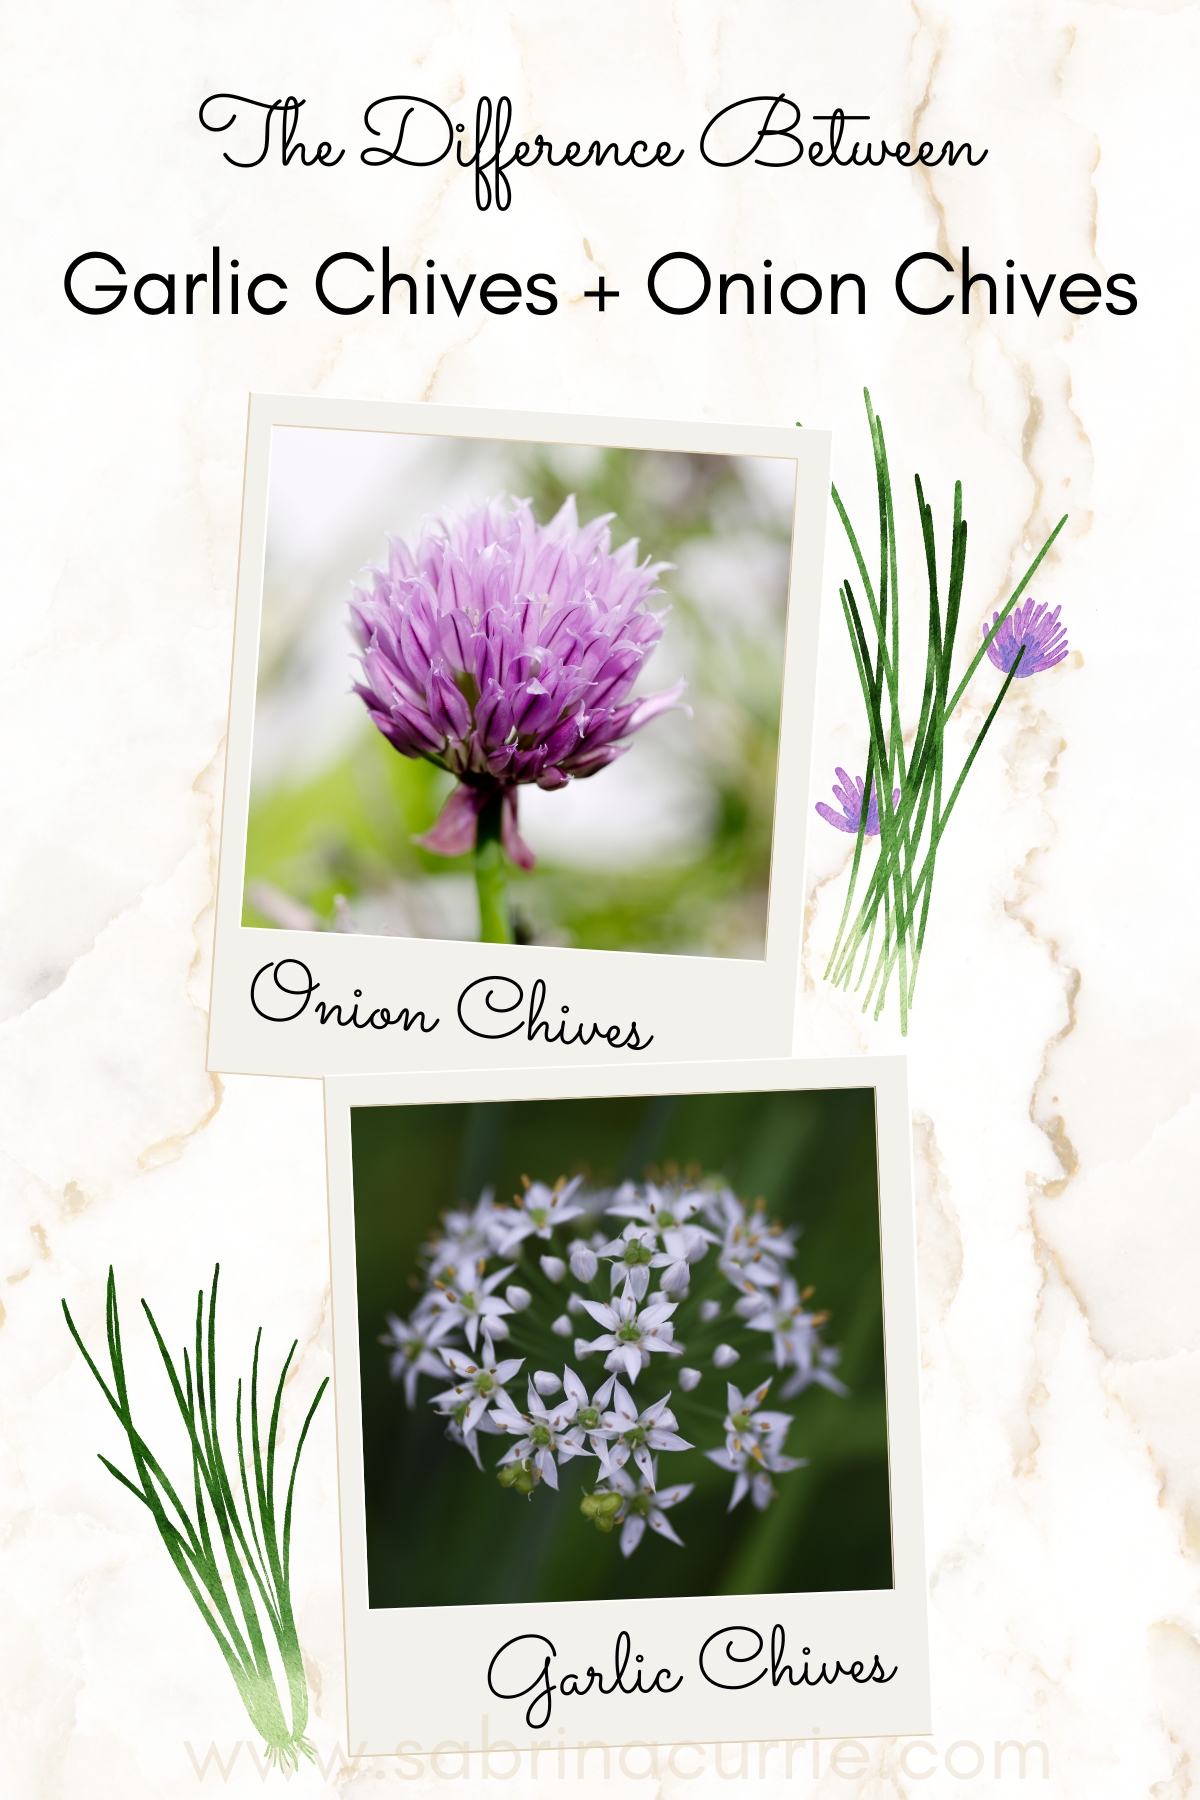 A photo of a purple fluffy chive flower and another photo of a white garlic chive flower and illustrations of the chive plants on a white and taupe marble background.